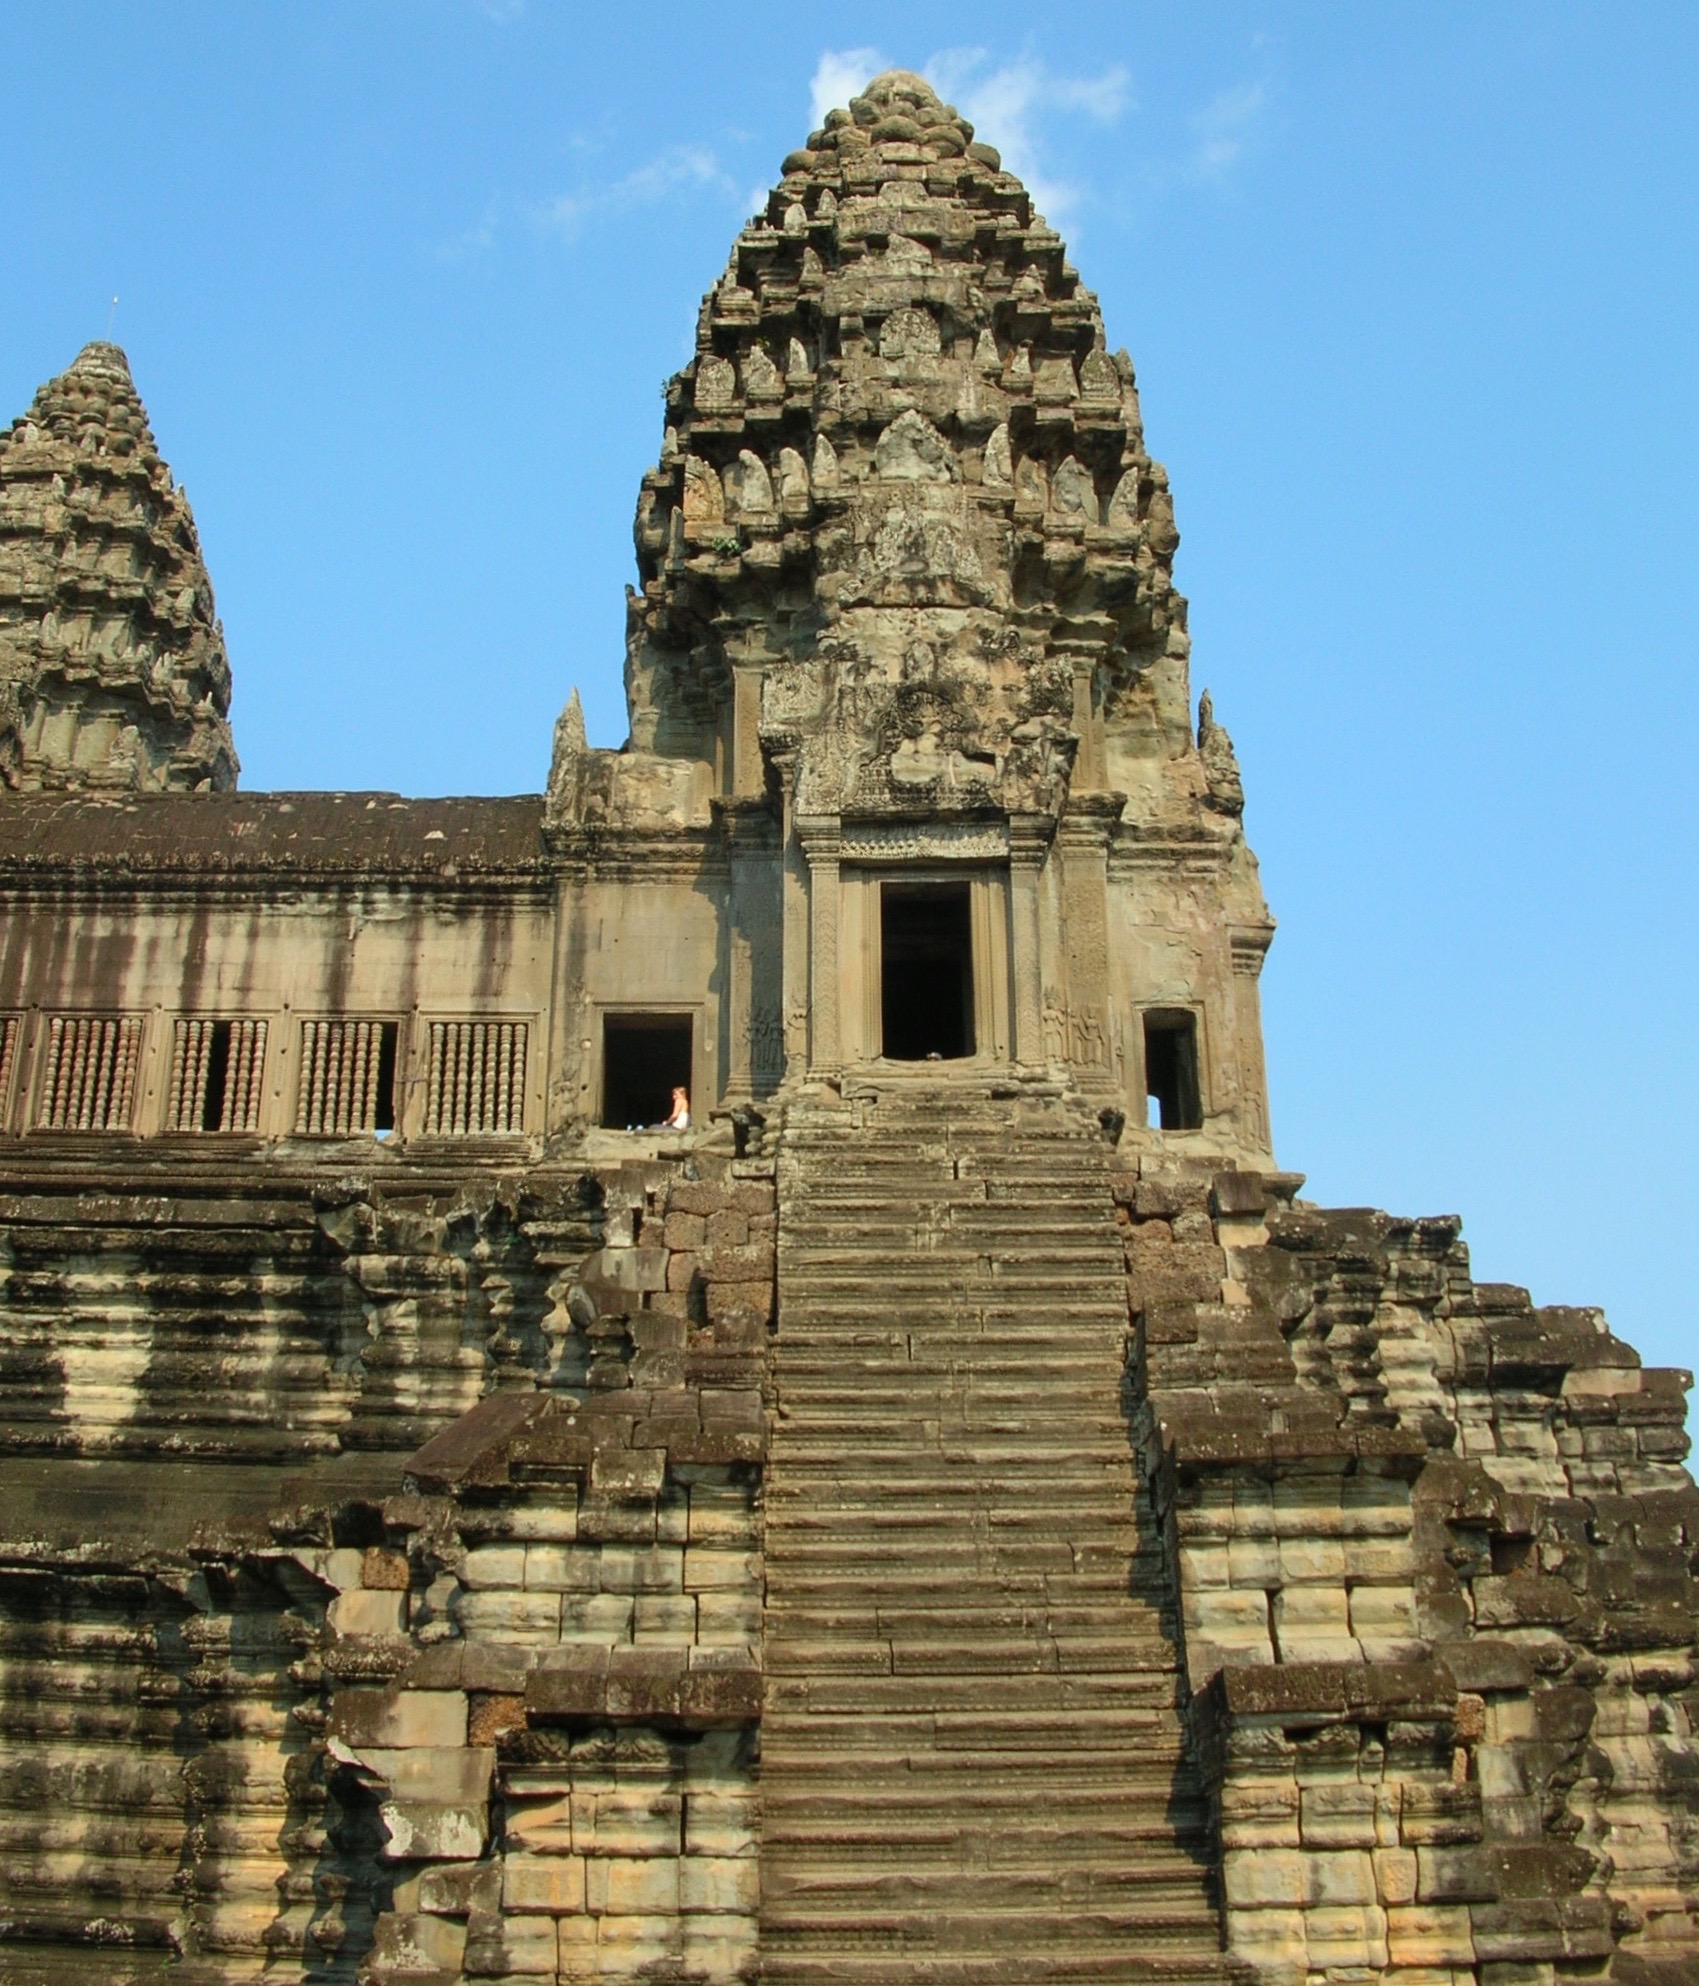 It's a vertical climb to reach the interior of the main Angkor Wat temple. Photo by Marla Norman.